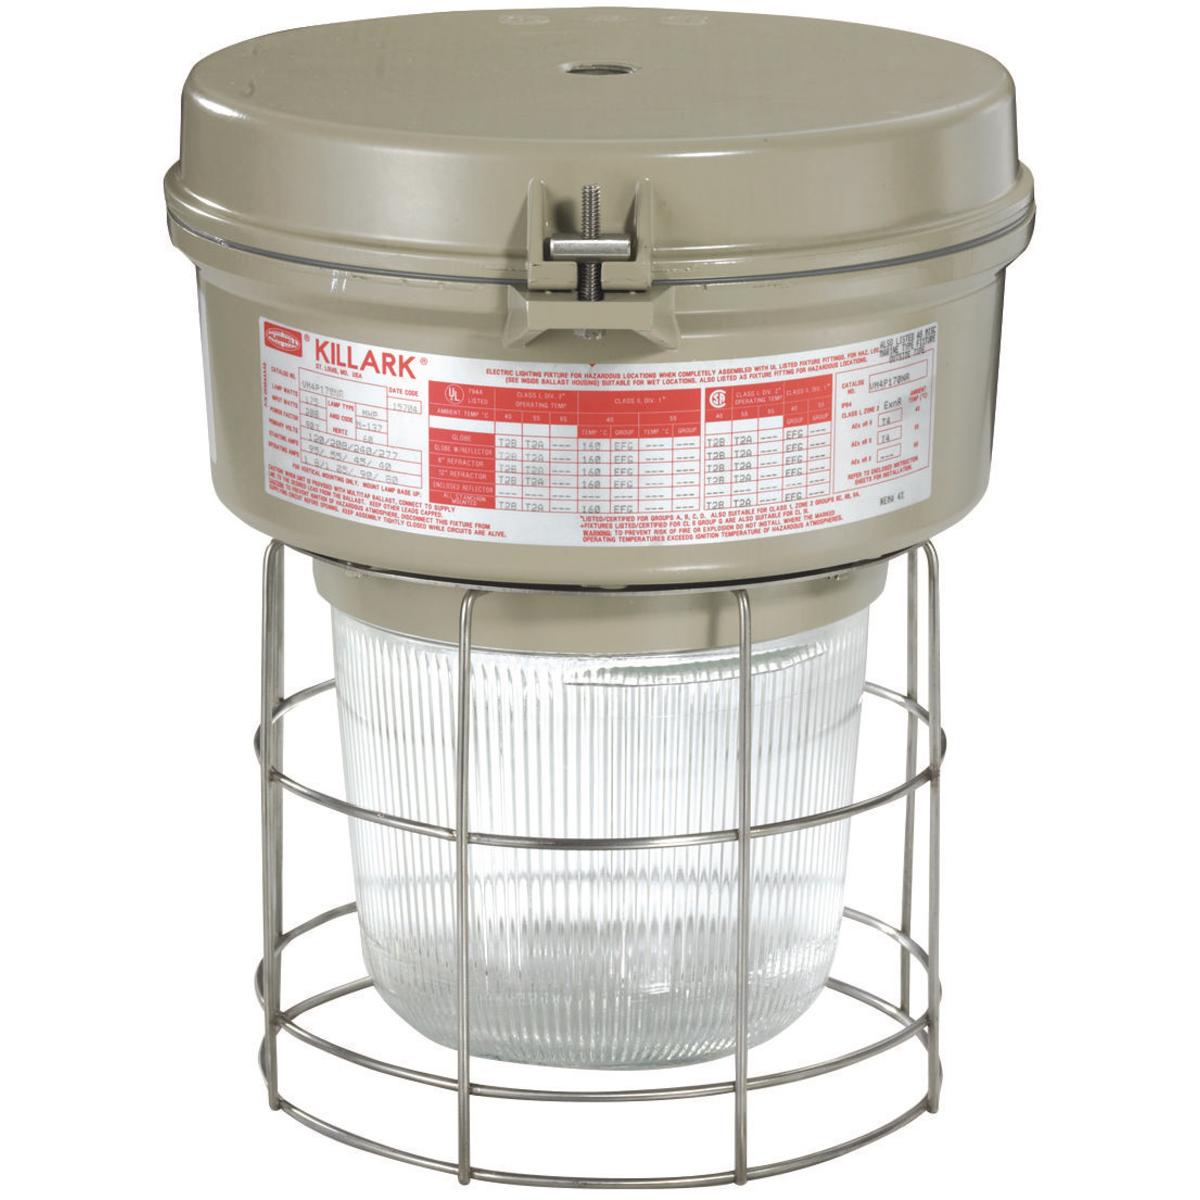 Hubbell VM4P170A2GLG VM4 Series - 175W Metal Halide Quadri-Volt - 3/4" Pendant - Globe and Guard  ; Ballast tank and splice box – corrosion resistant copper-free aluminum alloy with baked powder epoxy/polyester finish, electrostatically applied for complete, uniform corrosion